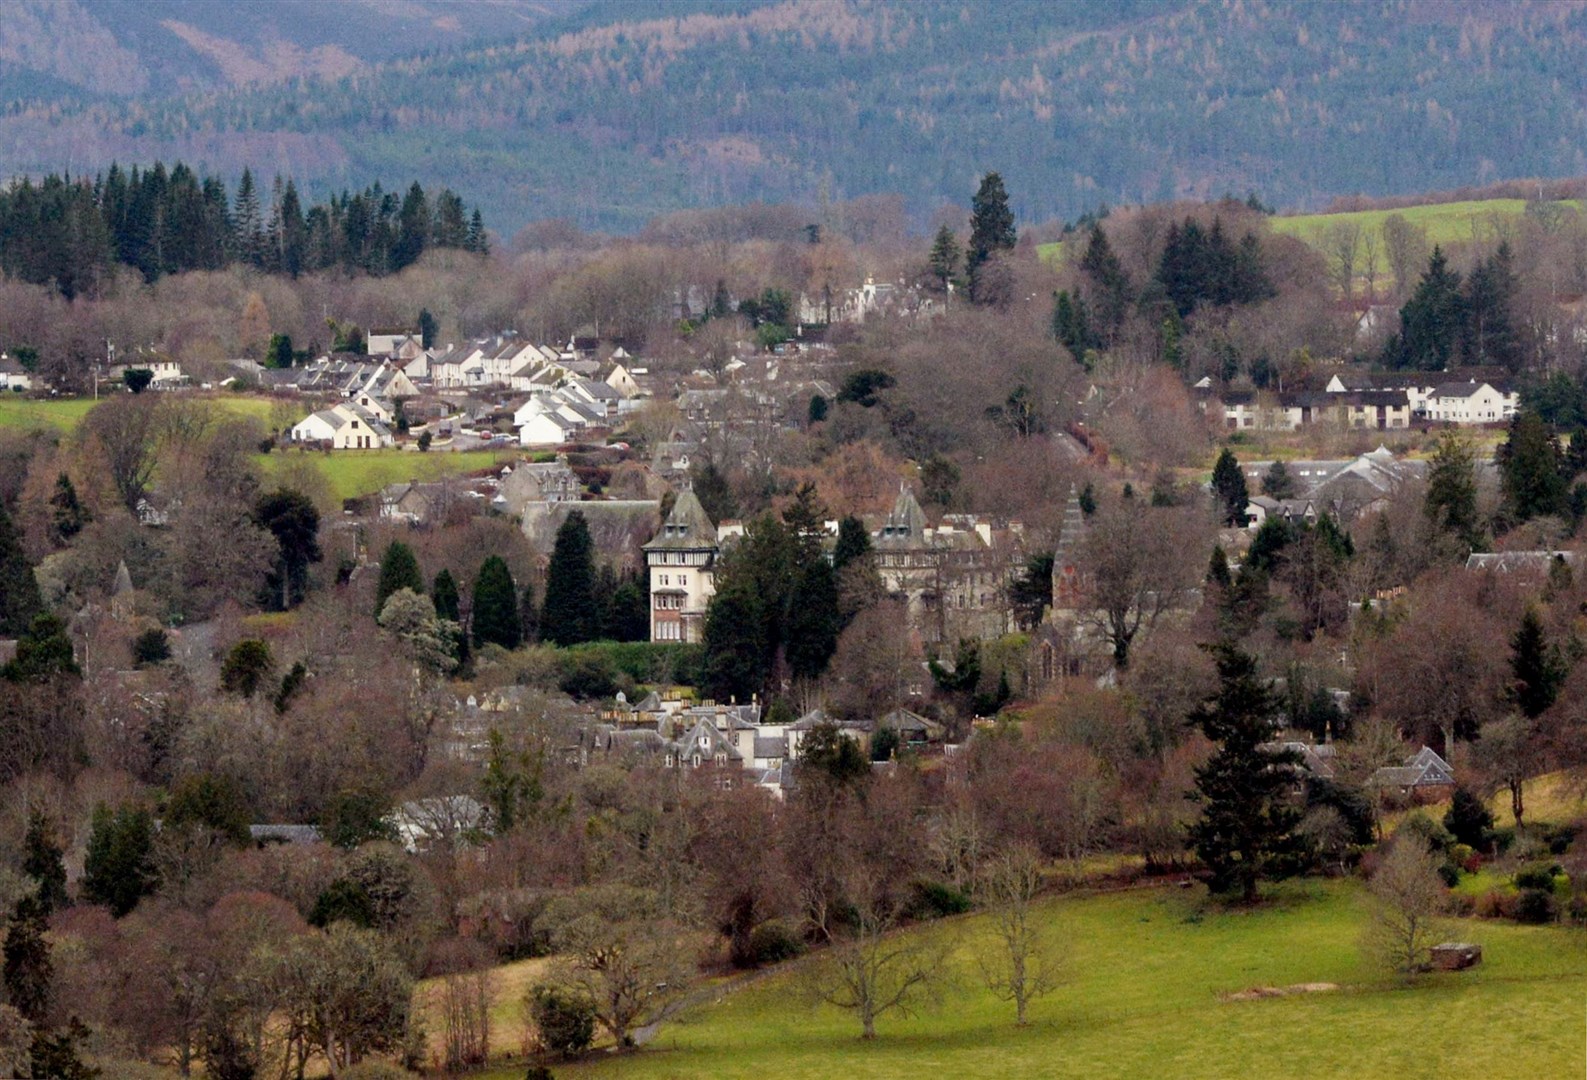 Strathpeffer is described as a 'distinct gem' by the councillor who chairs the economy and infrastructure committee overseeing the consultation.